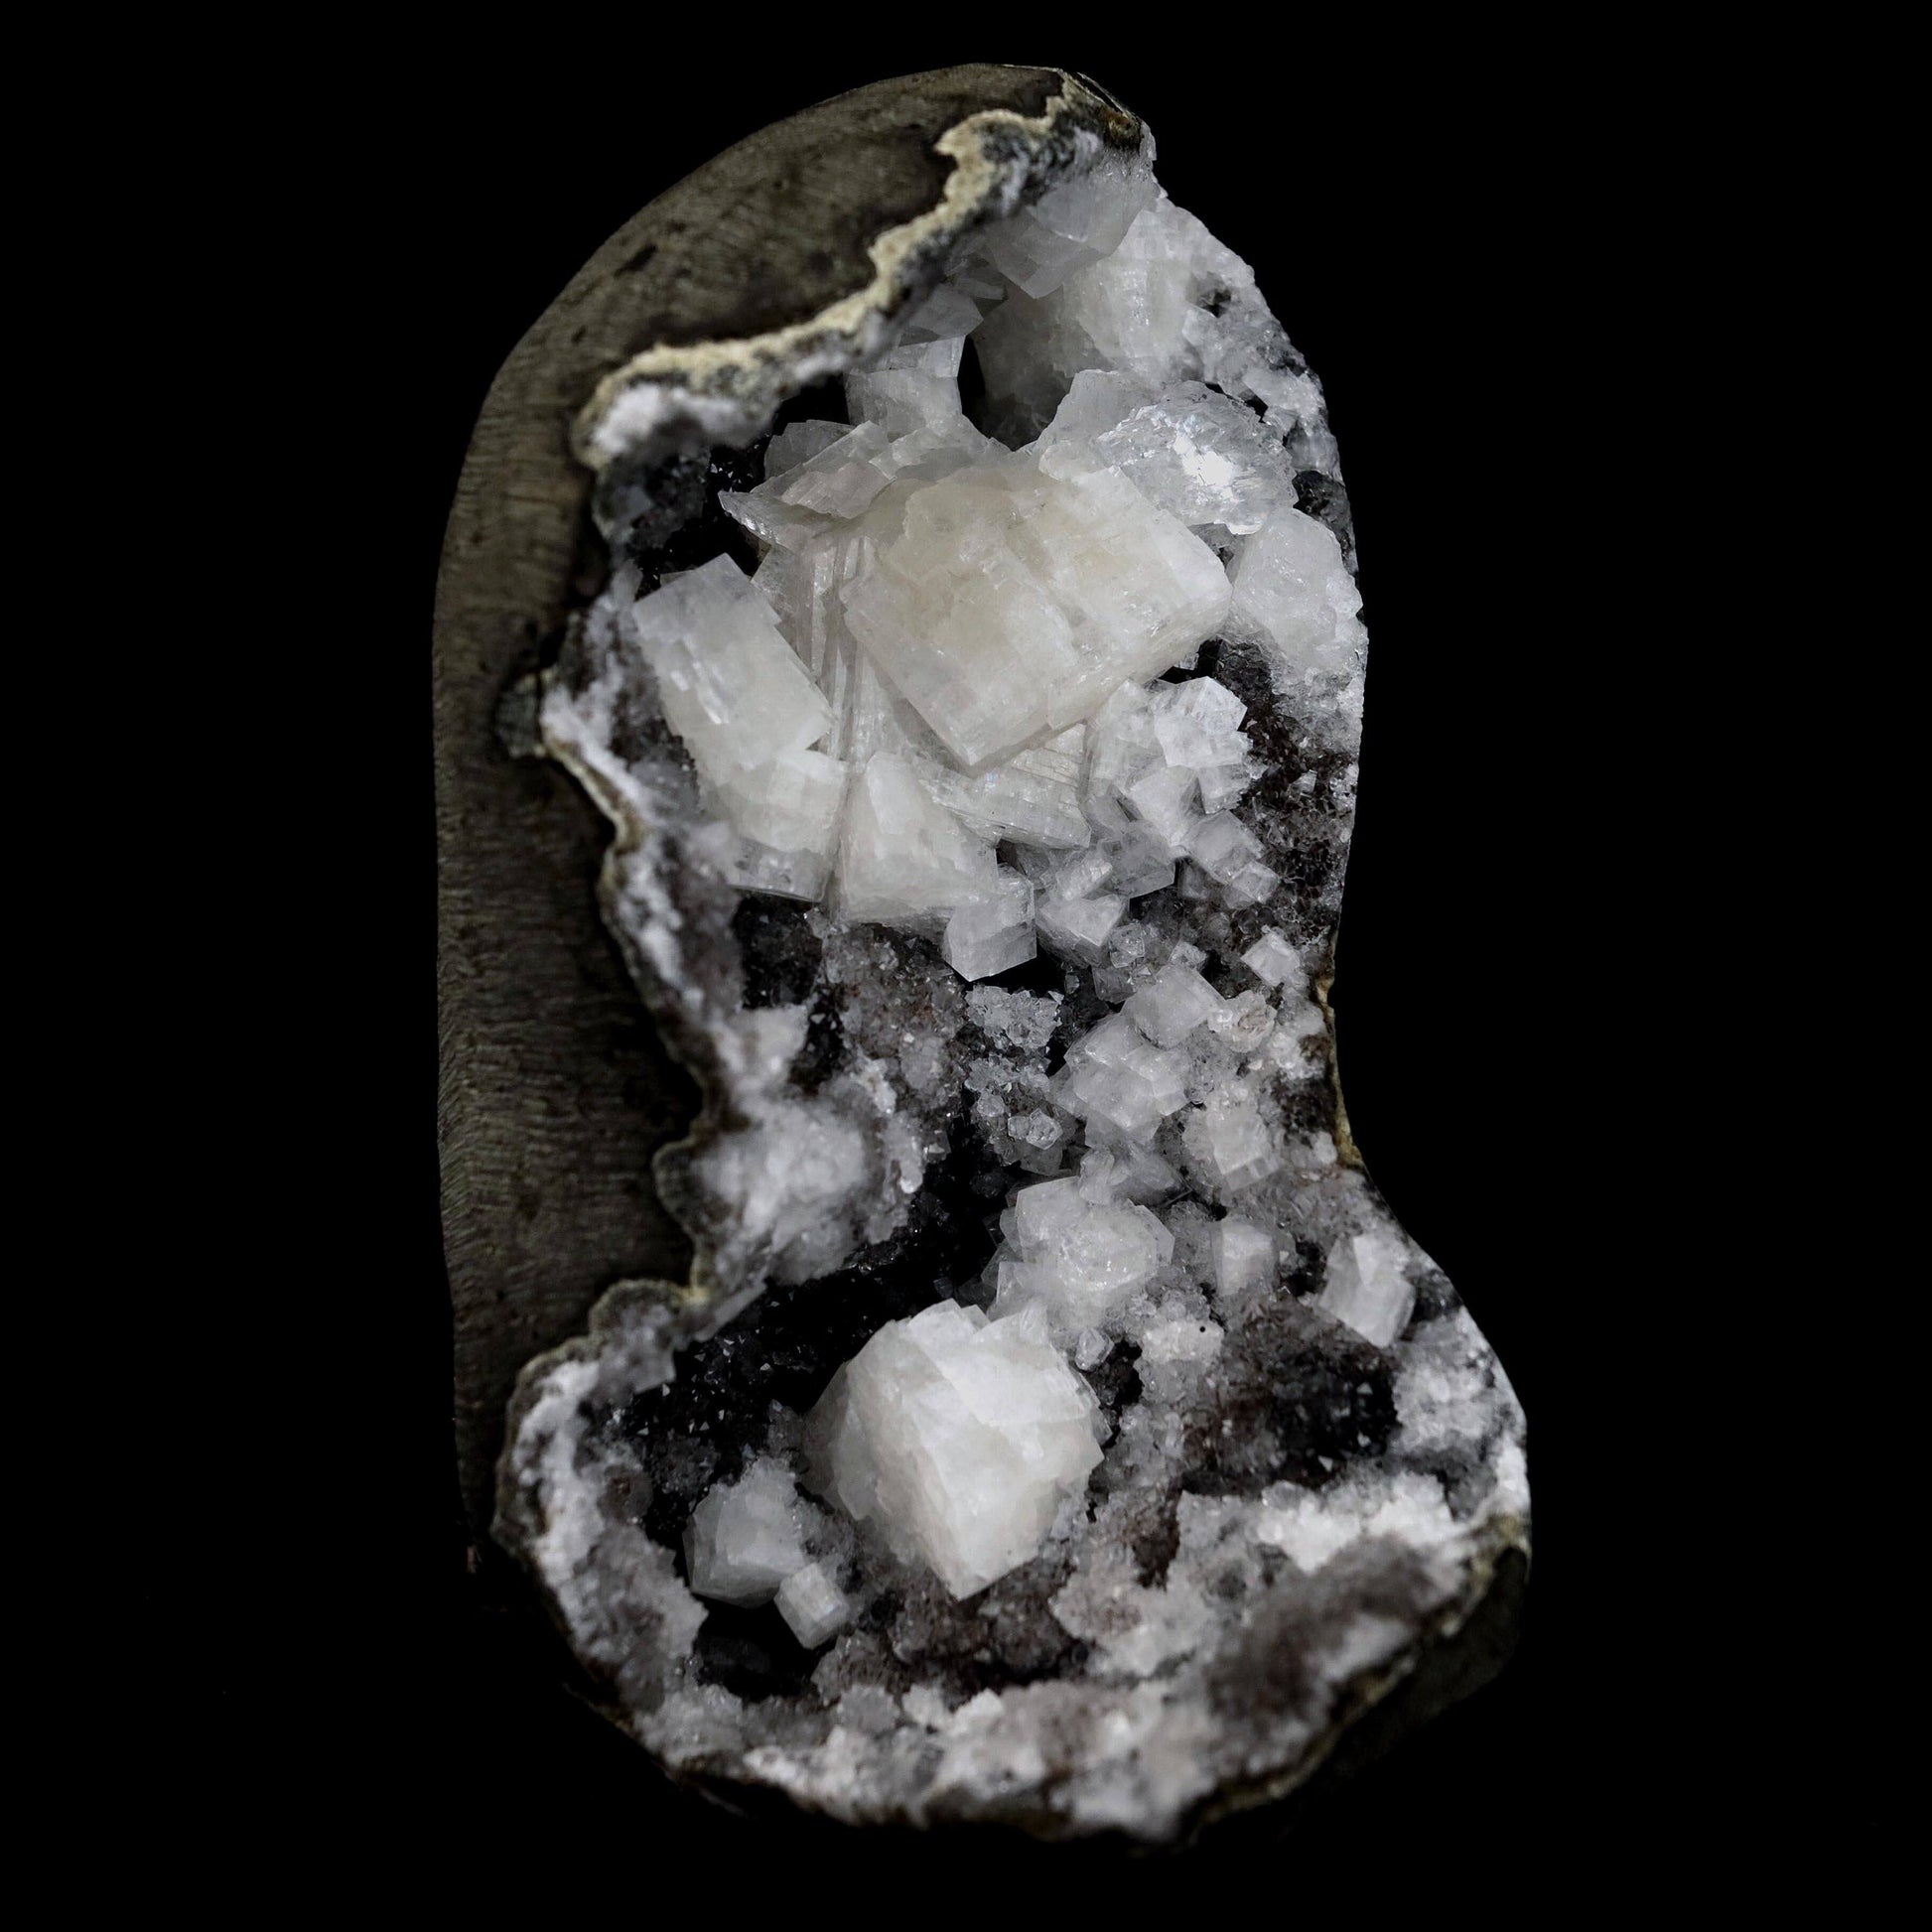 Chabazite Pesudeo Crystals inside Chalcedony Vug Natural Mineral Speci…  https://www.superbminerals.us/products/chabazite-pesudeo-crystals-inside-chalcedony-vug-natural-mineral-specimen-b-4661  Features: Exquisite basalt vug lined with sparkly drusy chalcedony, and containing excellent crystals of Chabazite. The Chabazite is over across, has superb luster, and appears to be twinned. The Epistilbite crystals are tall and have good luster. A great combination piece.Primary Mineral(s): Chabazite